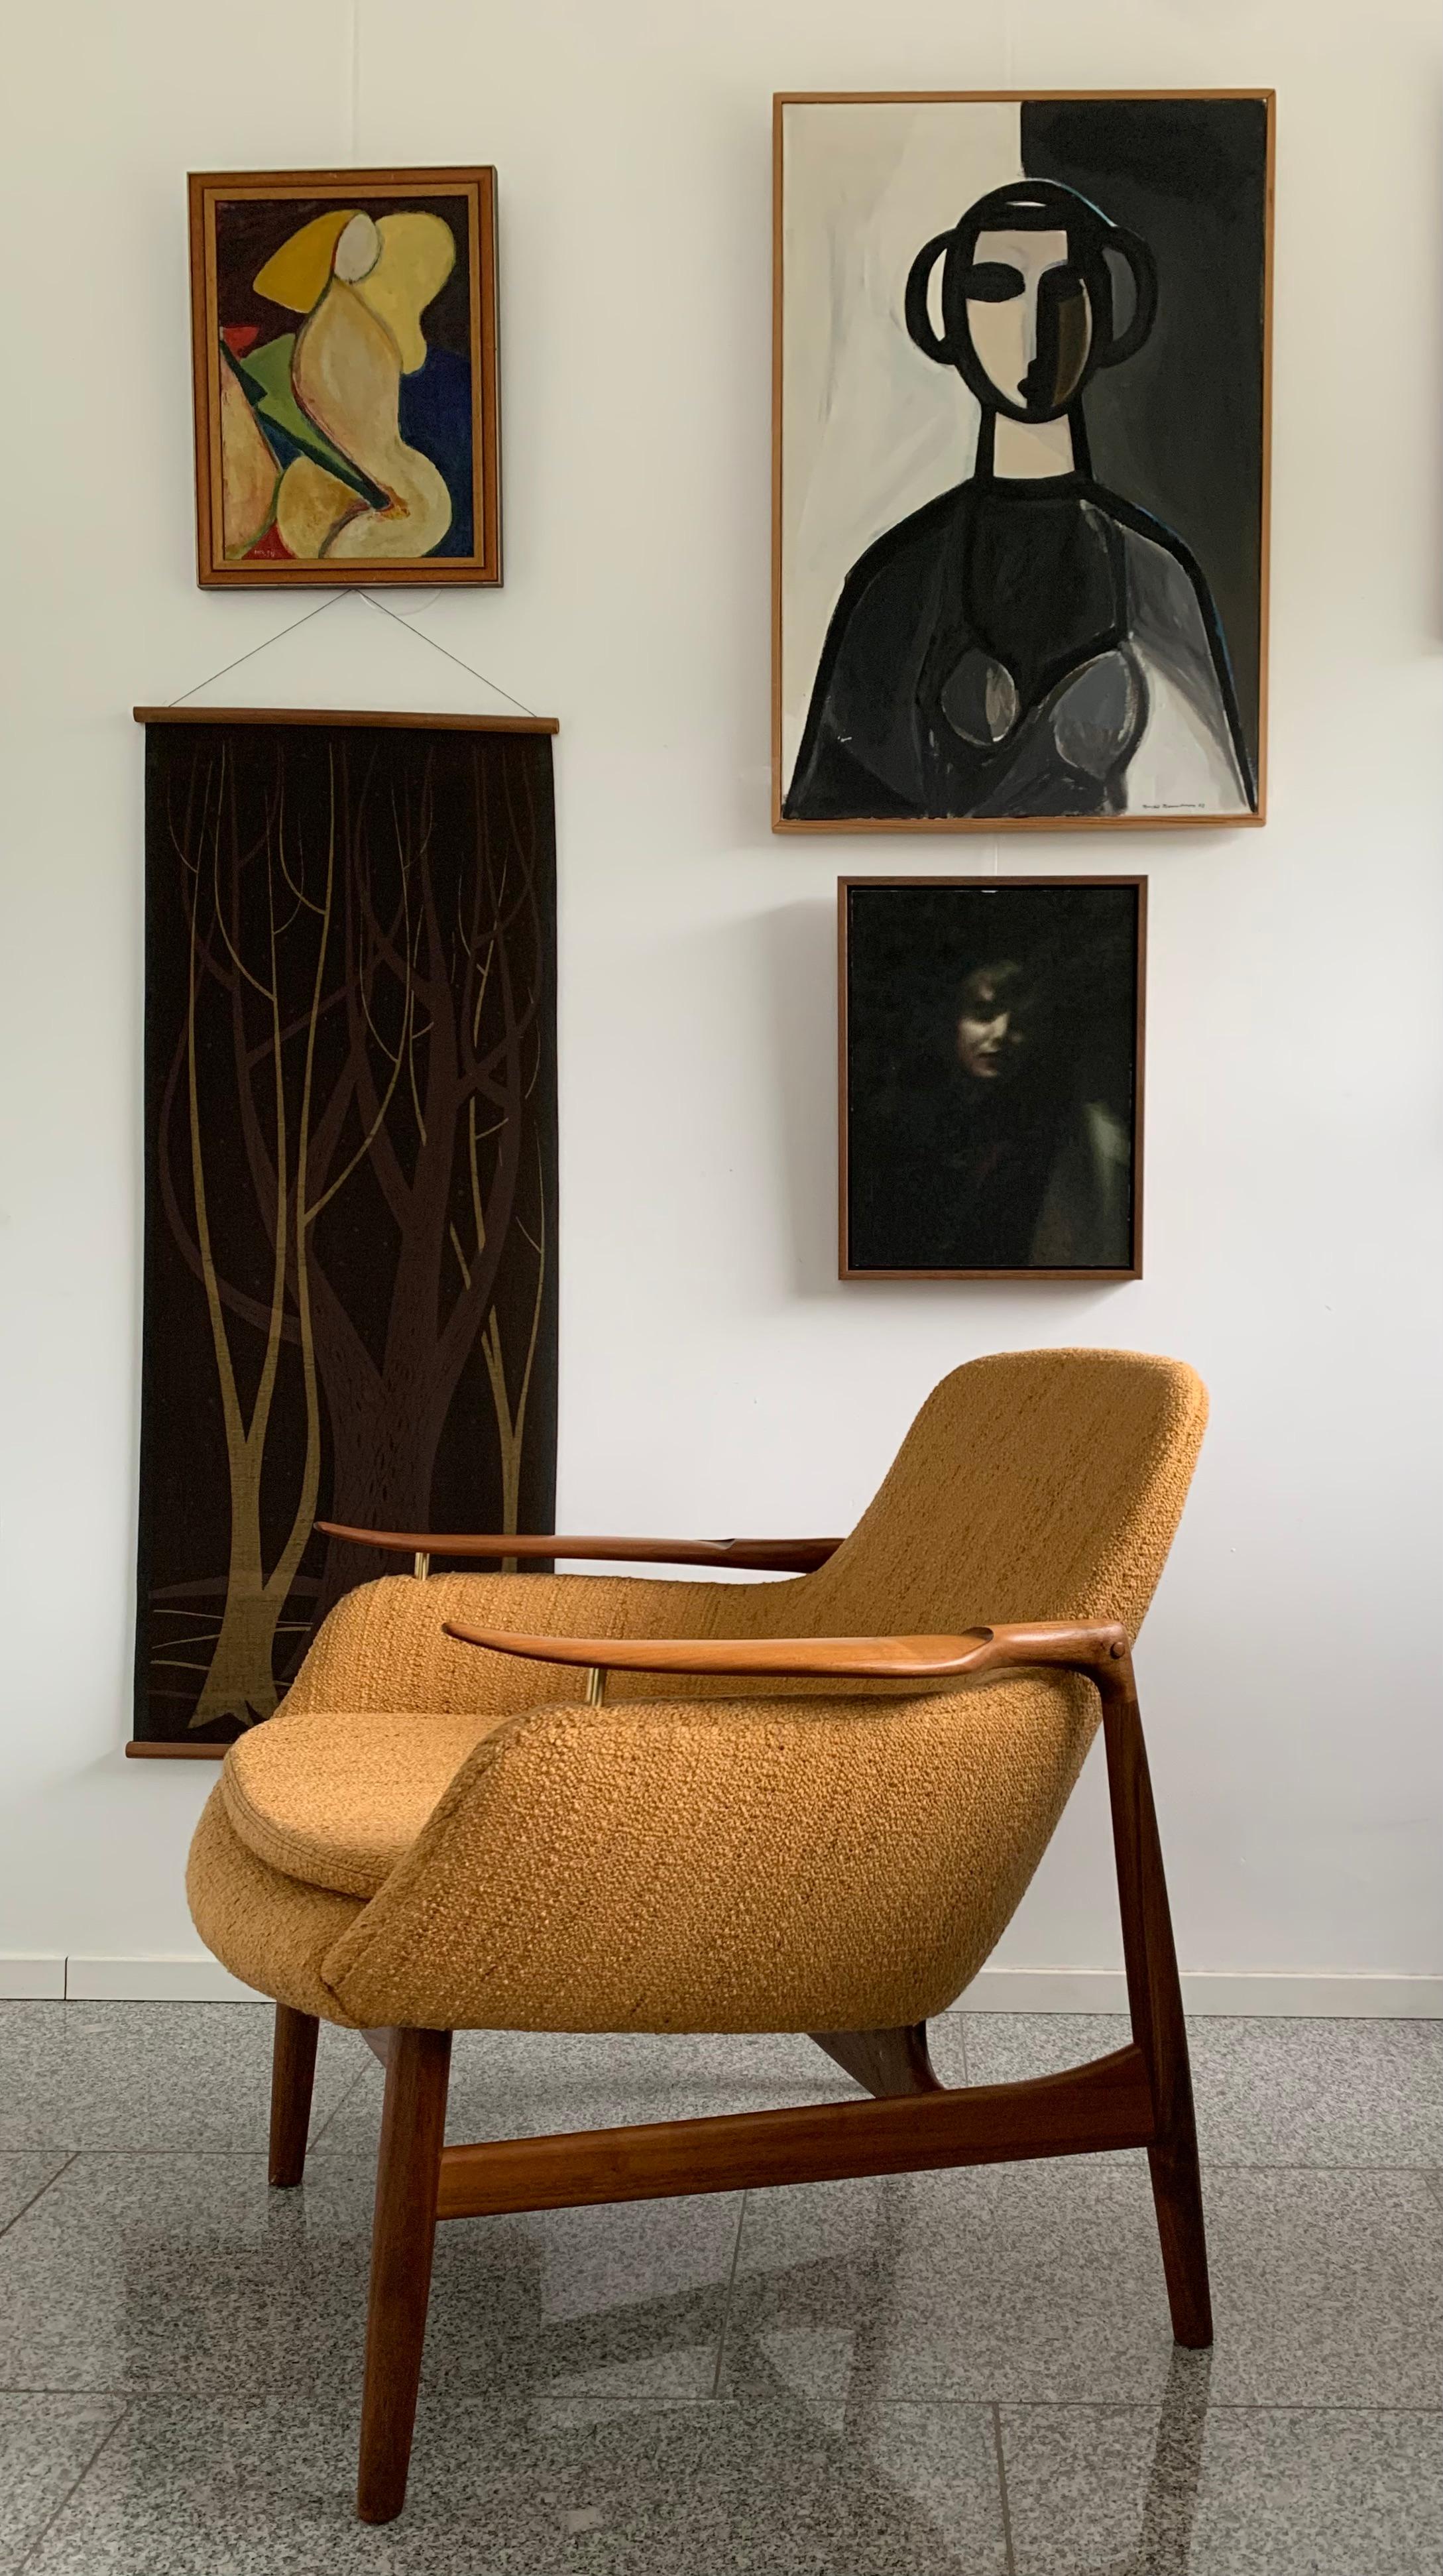 Chair model 53 was originally designed by Finn Juhl in 1953 and is one of the most appreciated designs from his oeuvre. It's an extravagant piece of furniture. It integrates the lightness and elegance of a wooden chair with an upholstered corpus, to